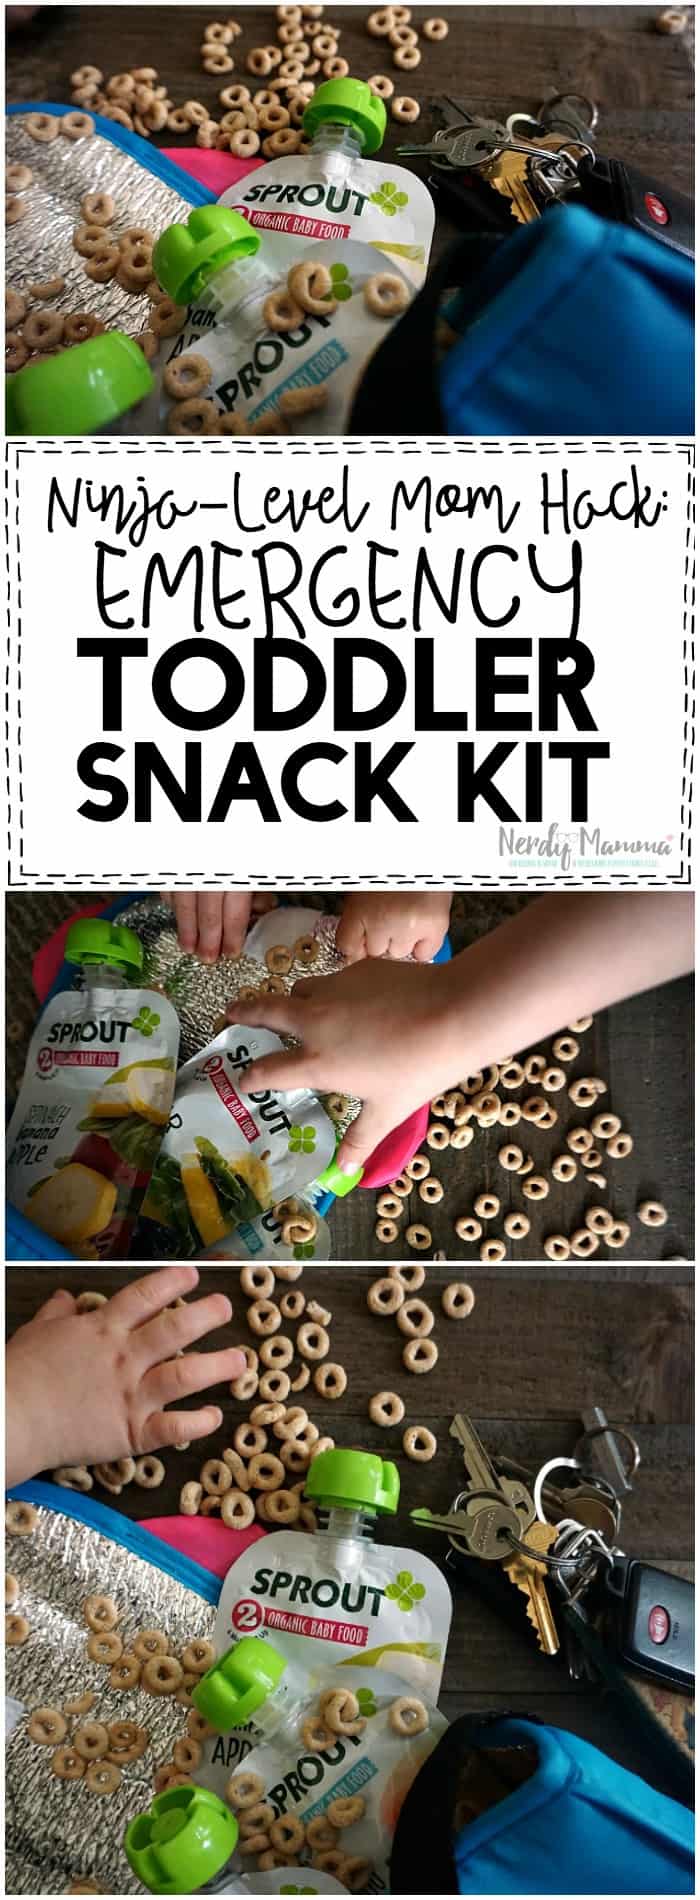 I love this Ninja-Level Mom Hack! Such a simple idea for a Snack Kit for a Toddler on-the-go!